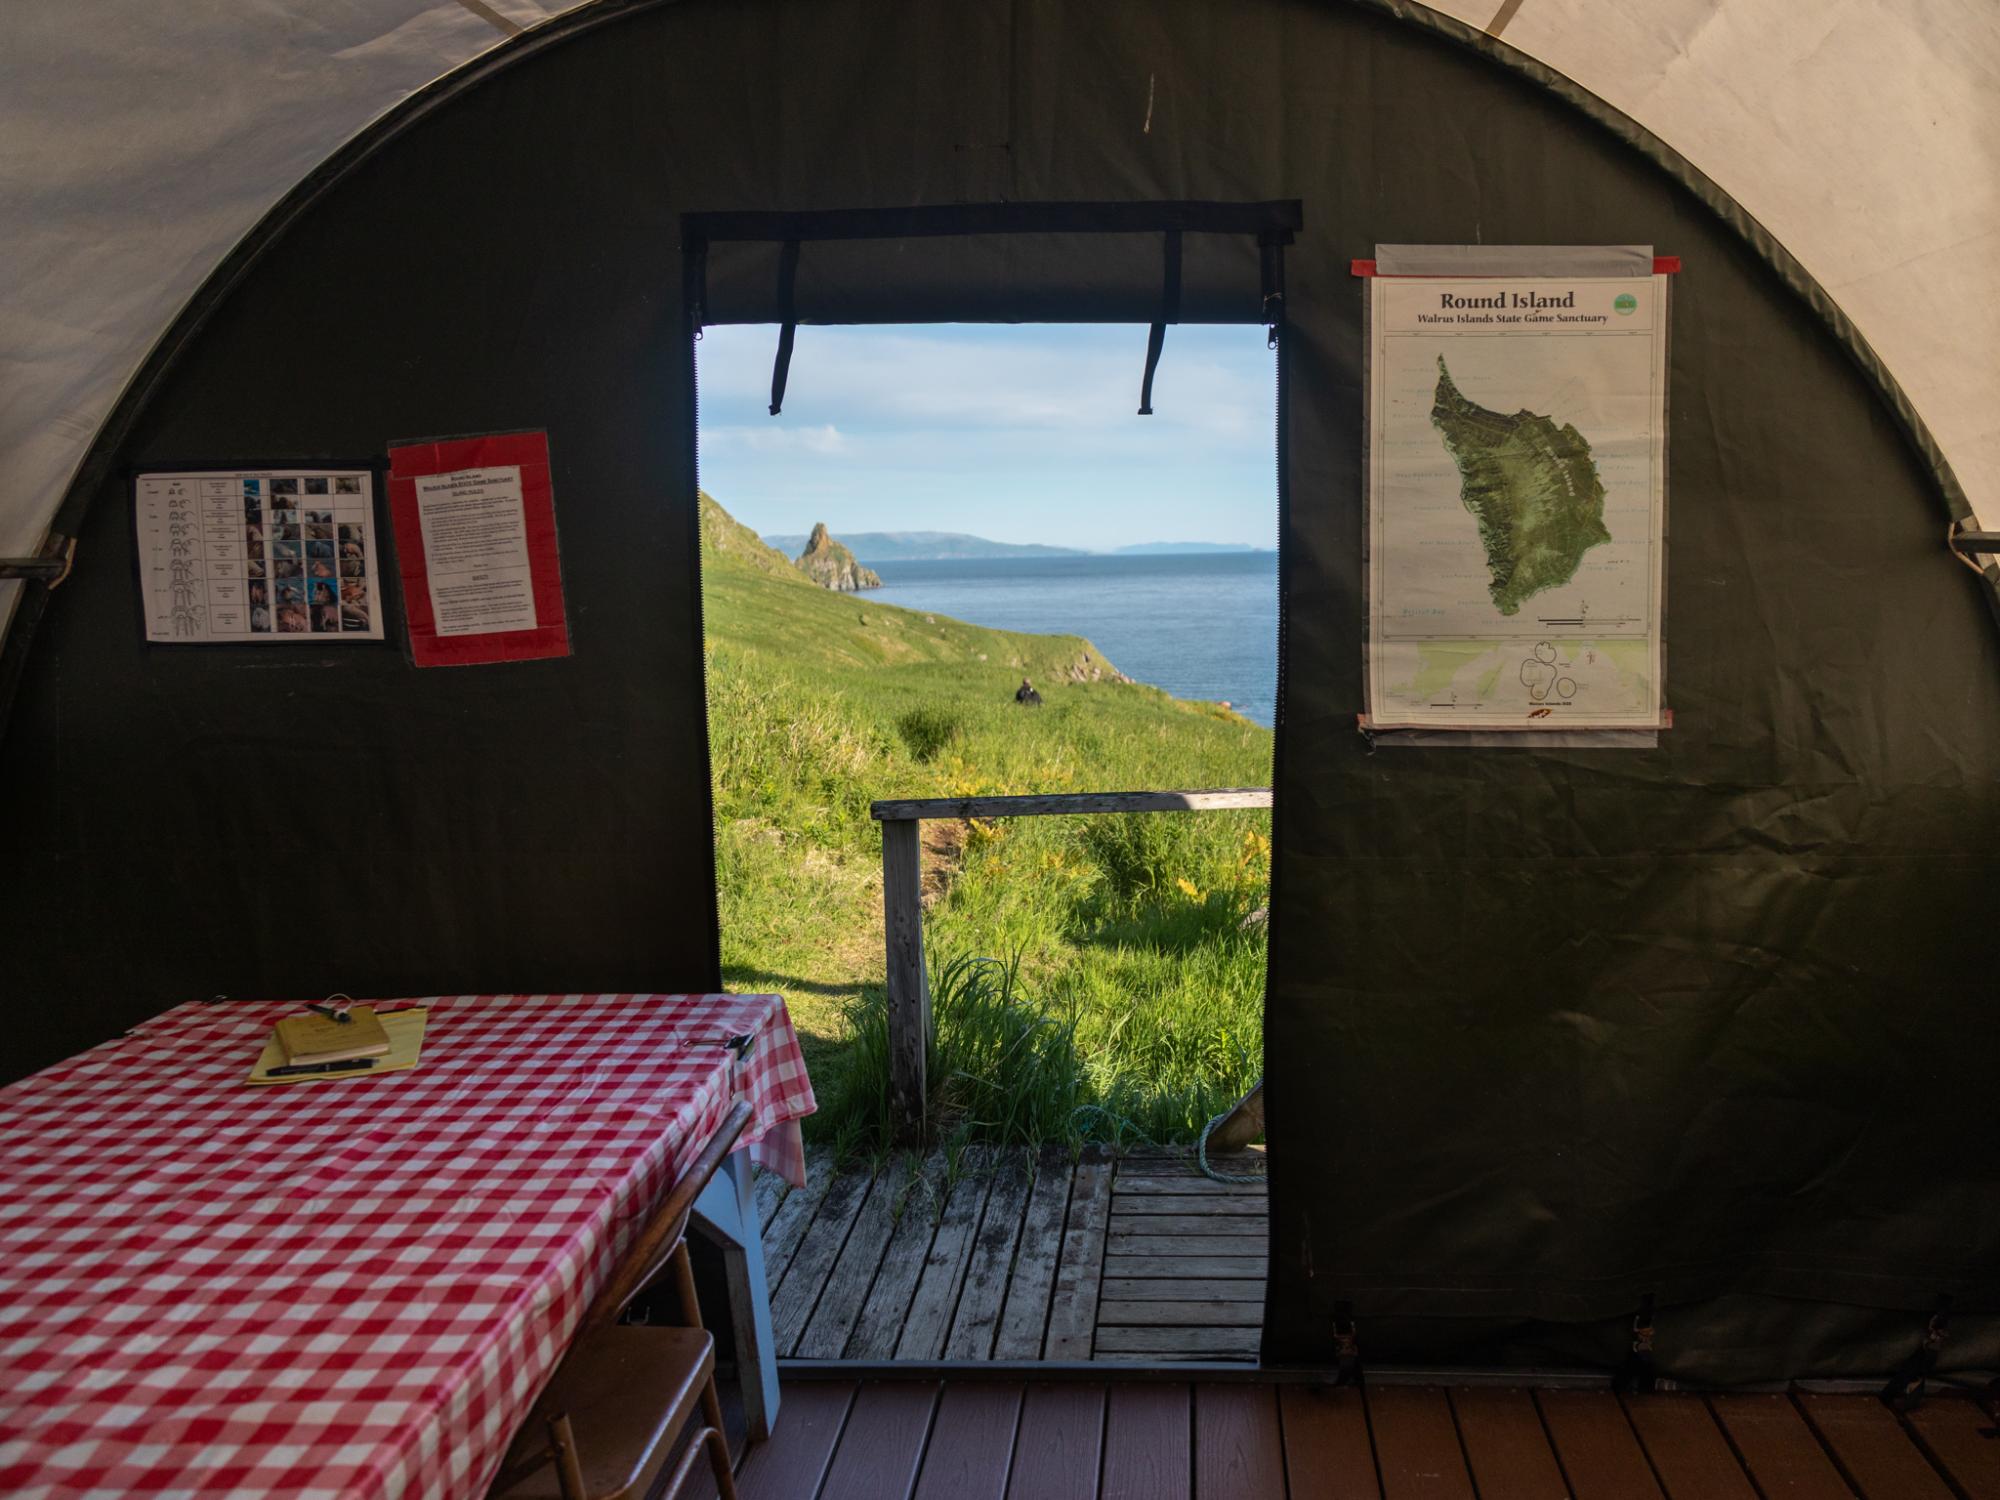 The cook tent in the visitor campground on Round Island. While campers are expected to be fully...